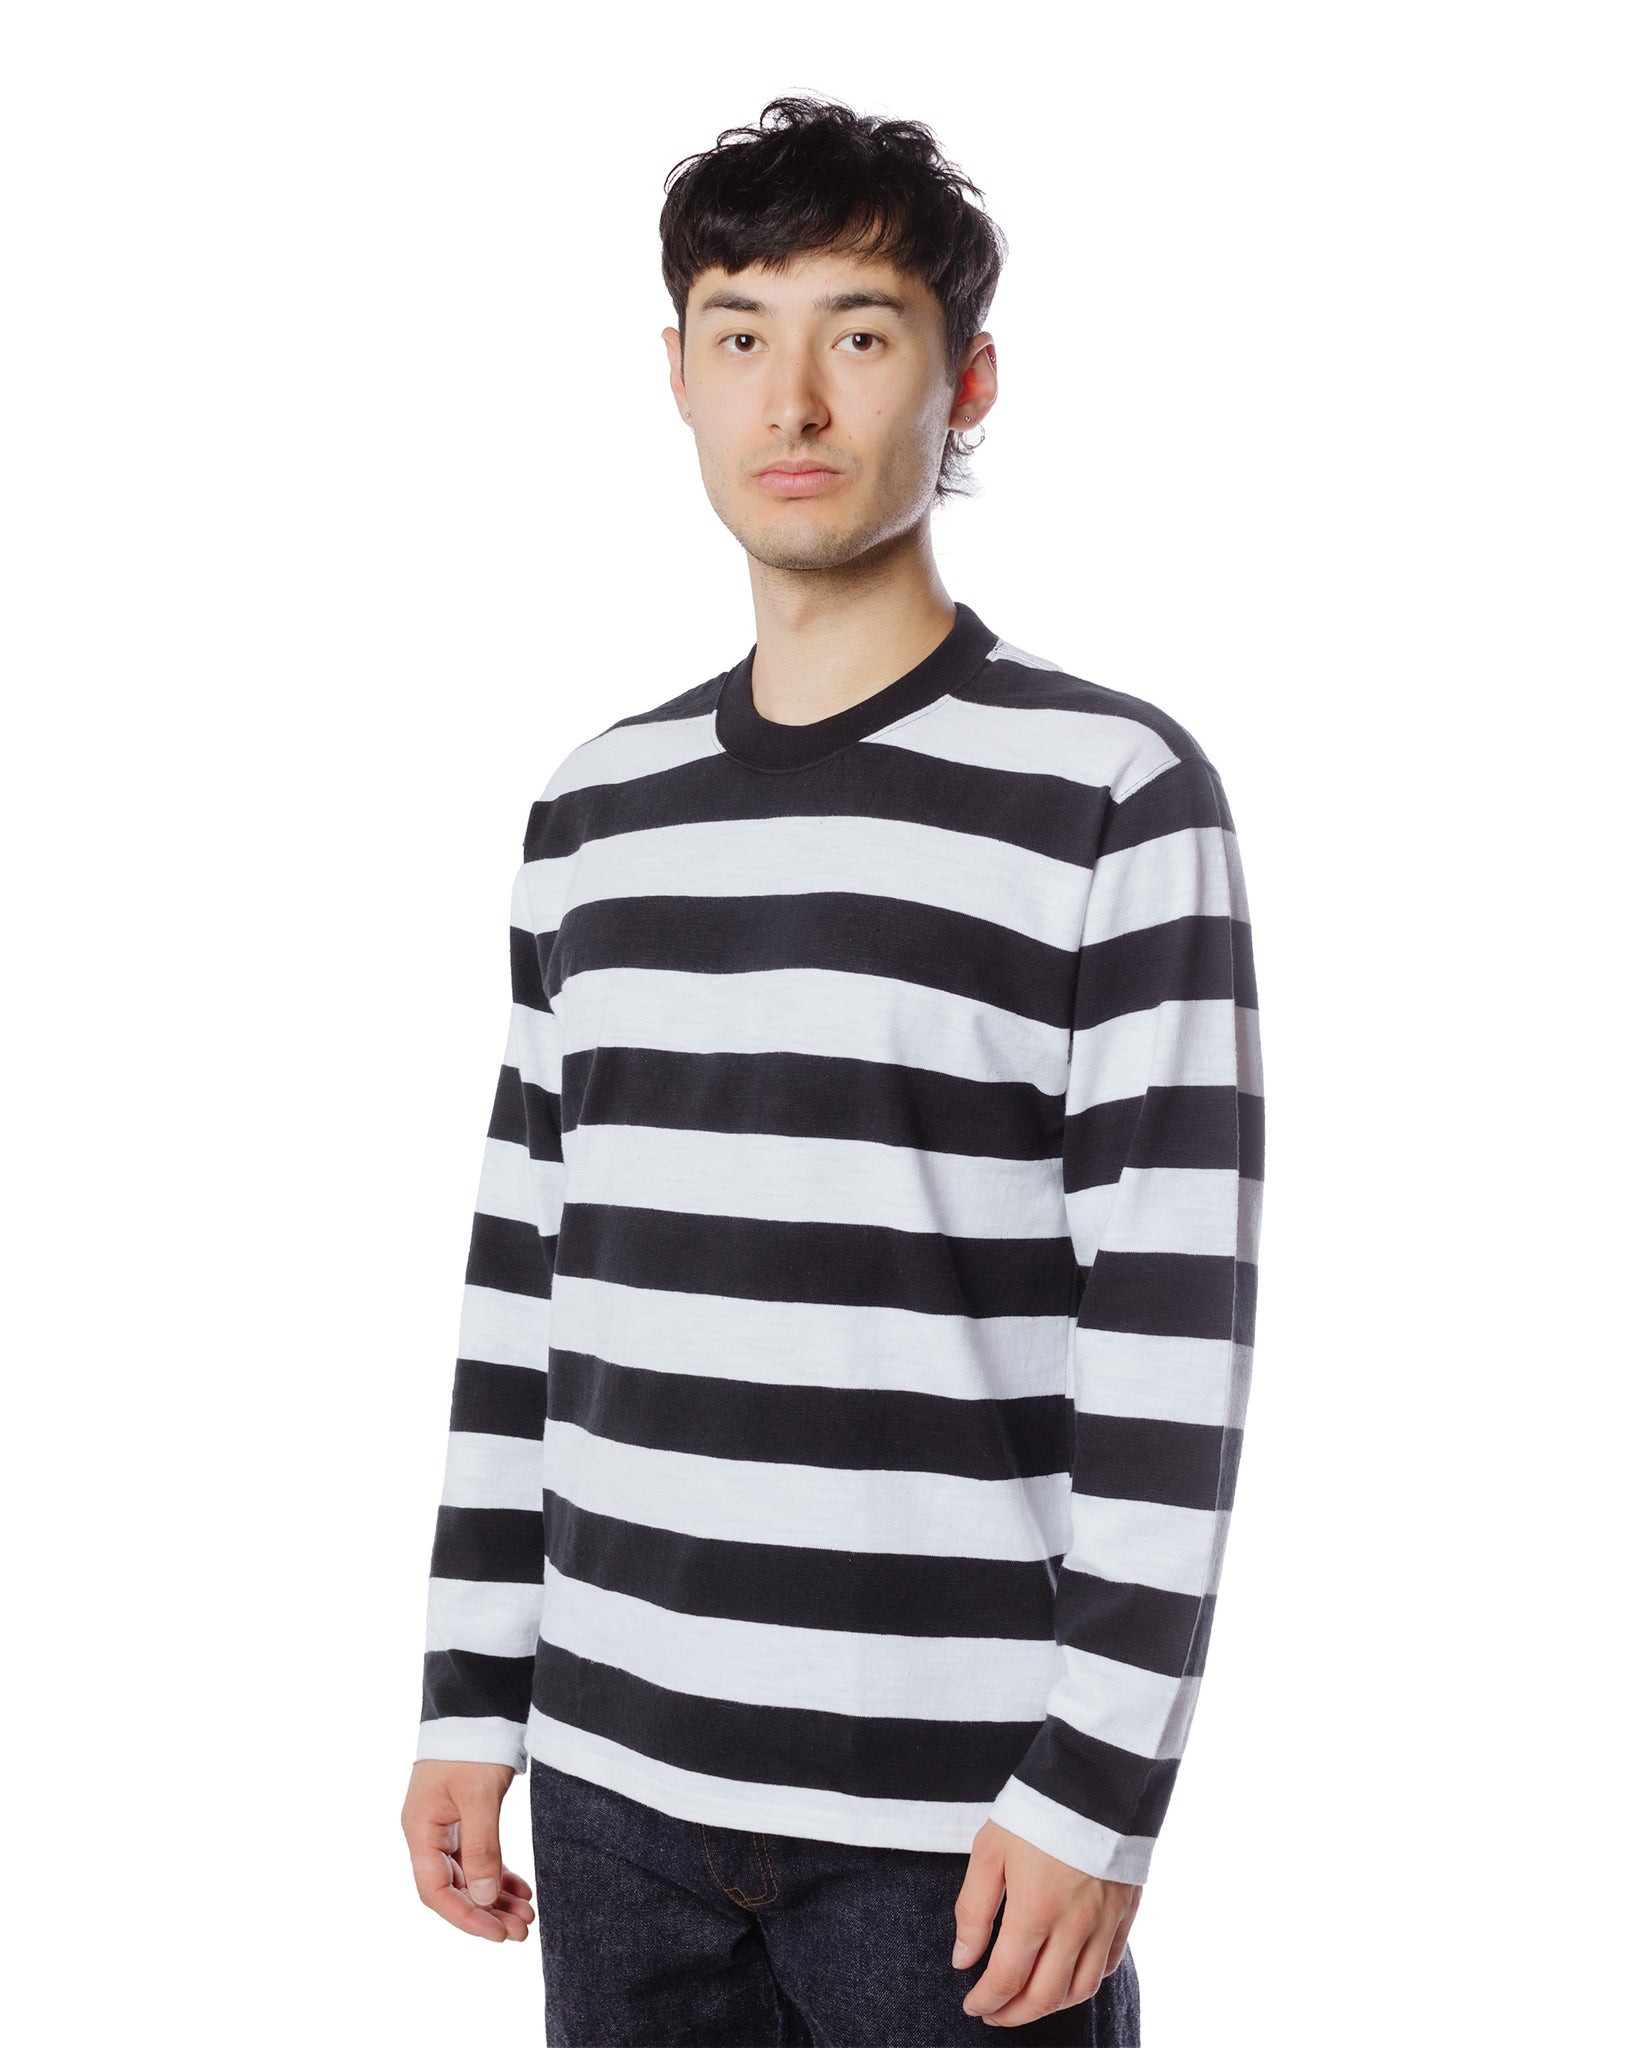 The Real McCoy's BC22005 Buco Stripe Tee L/S White Model Detail